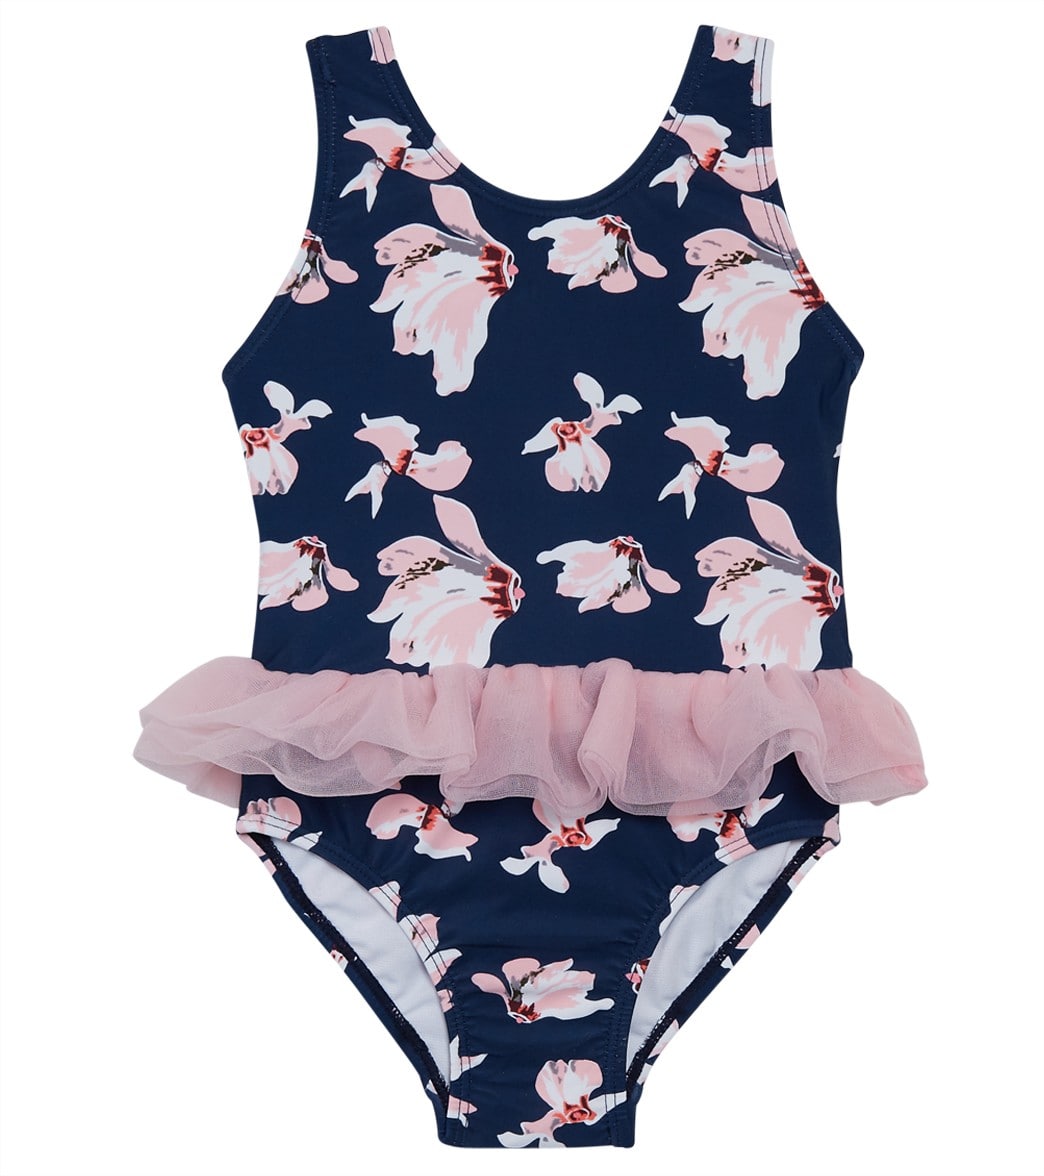 Snapper Rock Girls' Navy Orchid Tulle Skirt One Piece Swimsuit Baby - 12-18 Months Nylon/Spandex - Swimoutlet.com